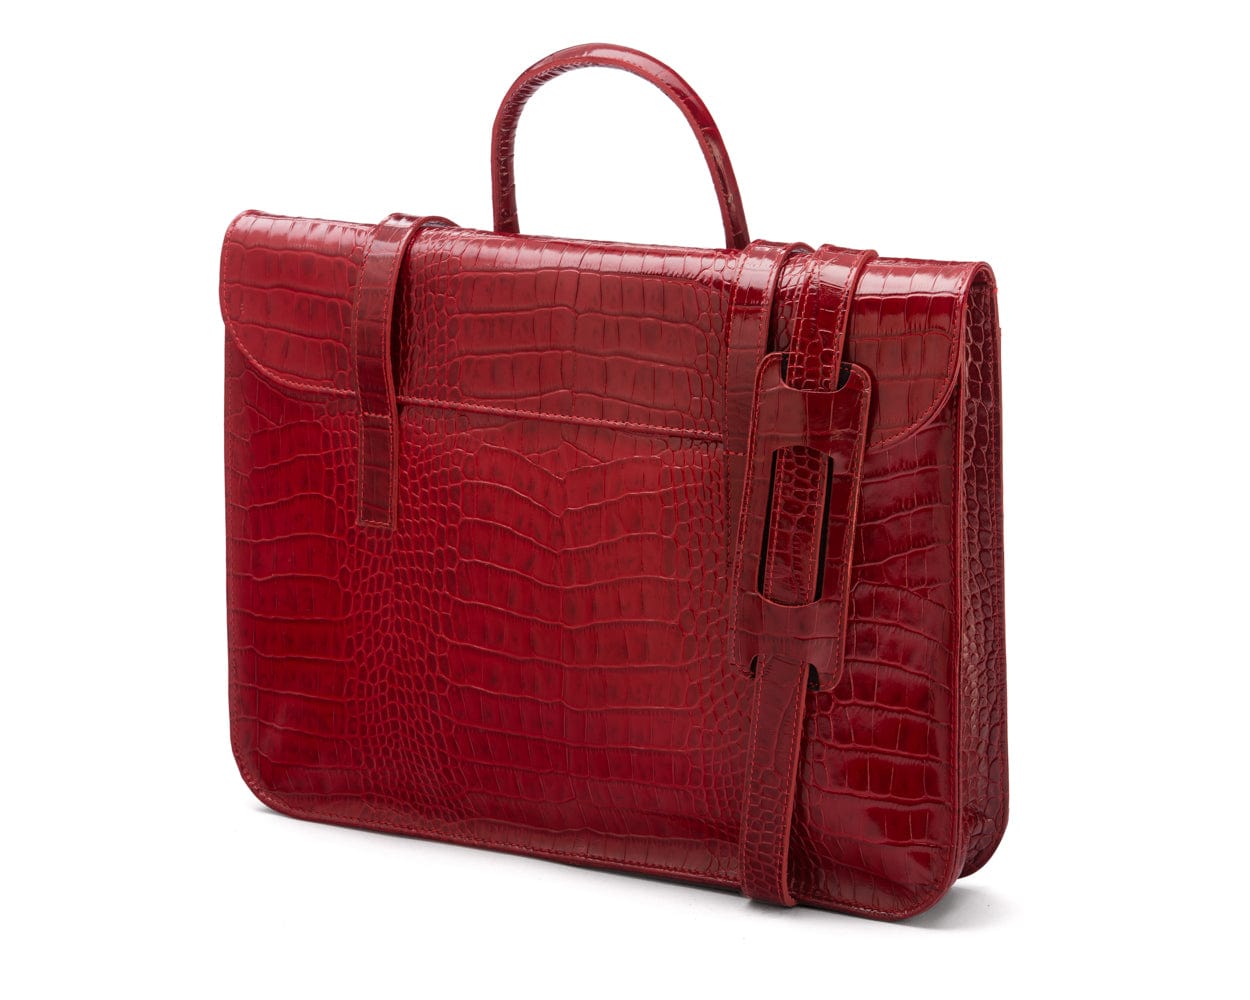 Leather music bag, red croc, side